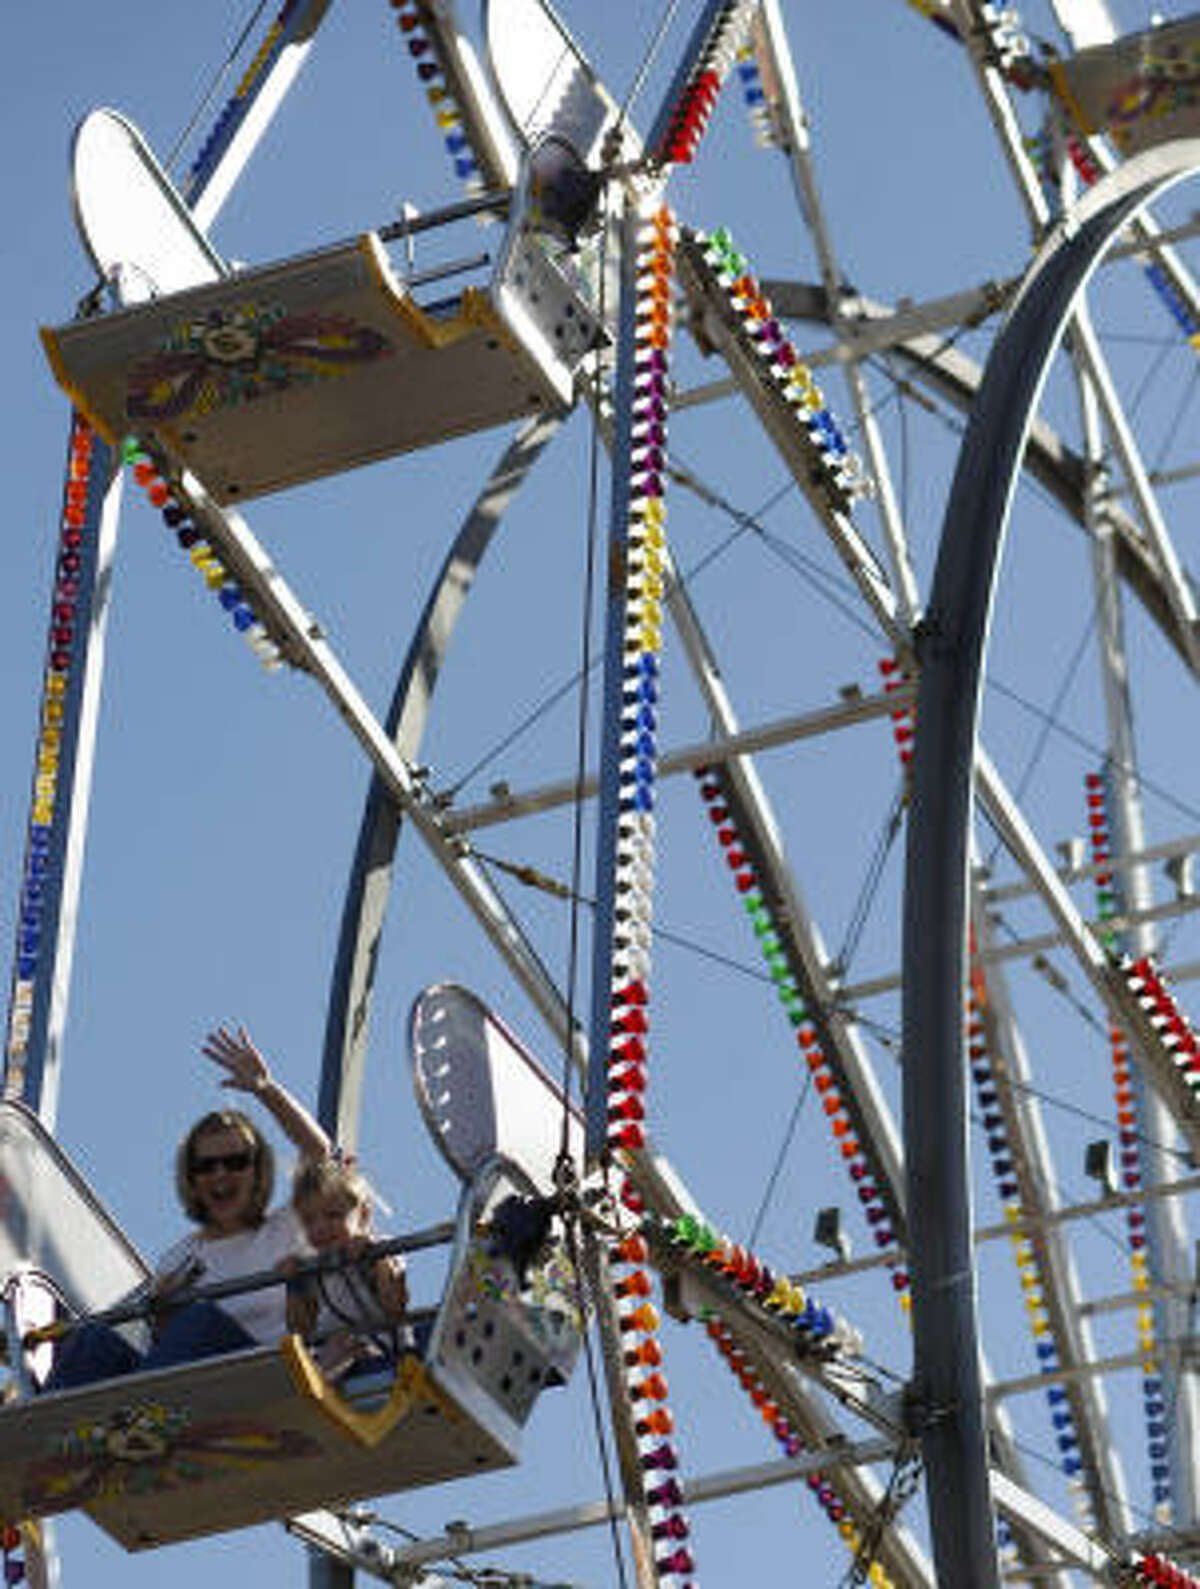 Angel Male, left, waving for a picture, and her daughter, Zoe, 3, both of League City, ride the Big Eli Ferris wheel at the Kids Country Kiddie carnival during The Houston Livestock Show and Rodeo Wednesday in Reliant Park.